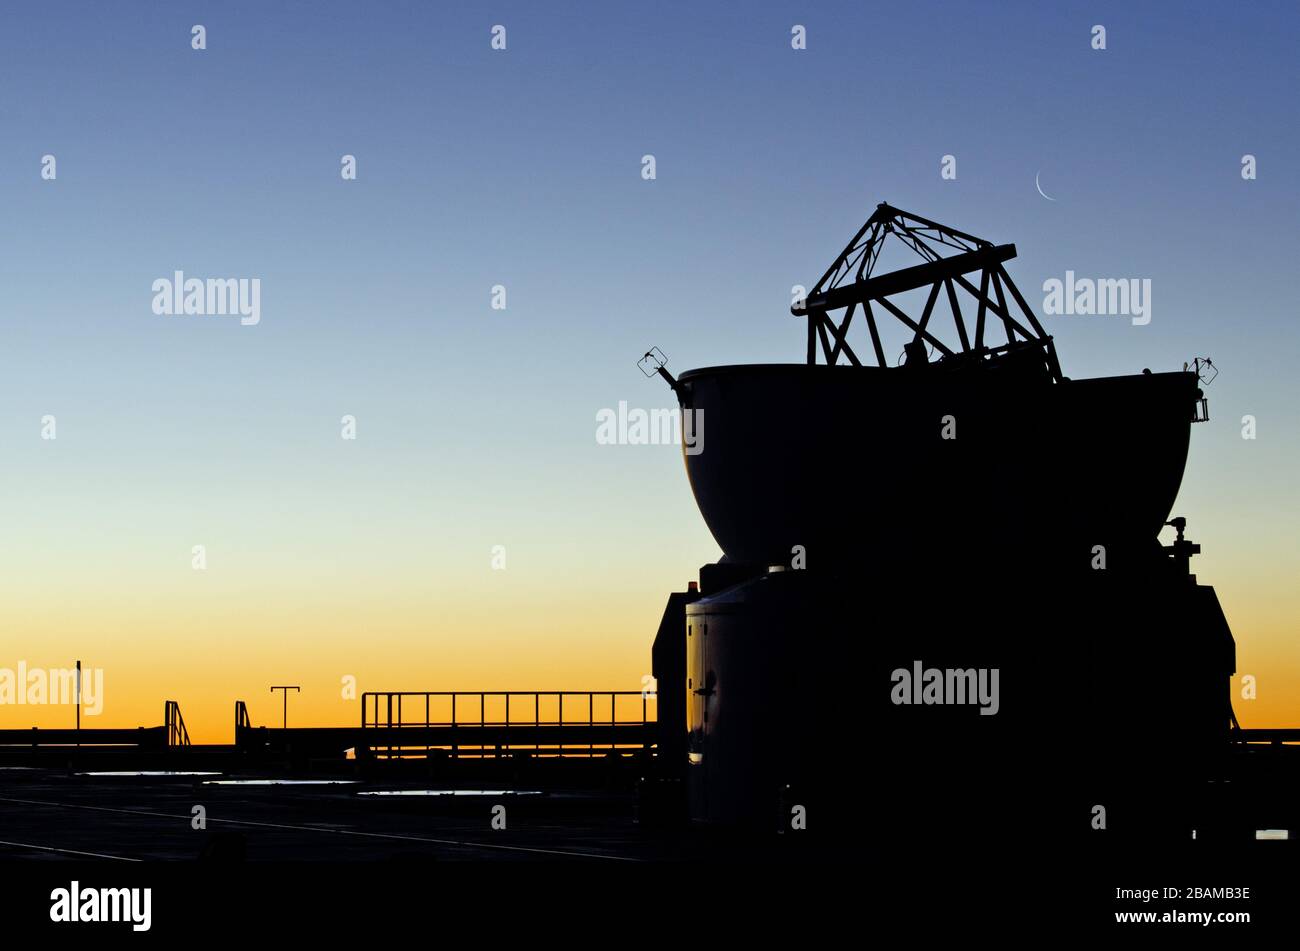 English: Pictured here at sunset is one of the four Auxiliary Telescopes  (ATs) of the Very Large Telescope Interferometer (VLTI), shown at ESO's  Paranal Observatory. The faint crescent Moon can be seen